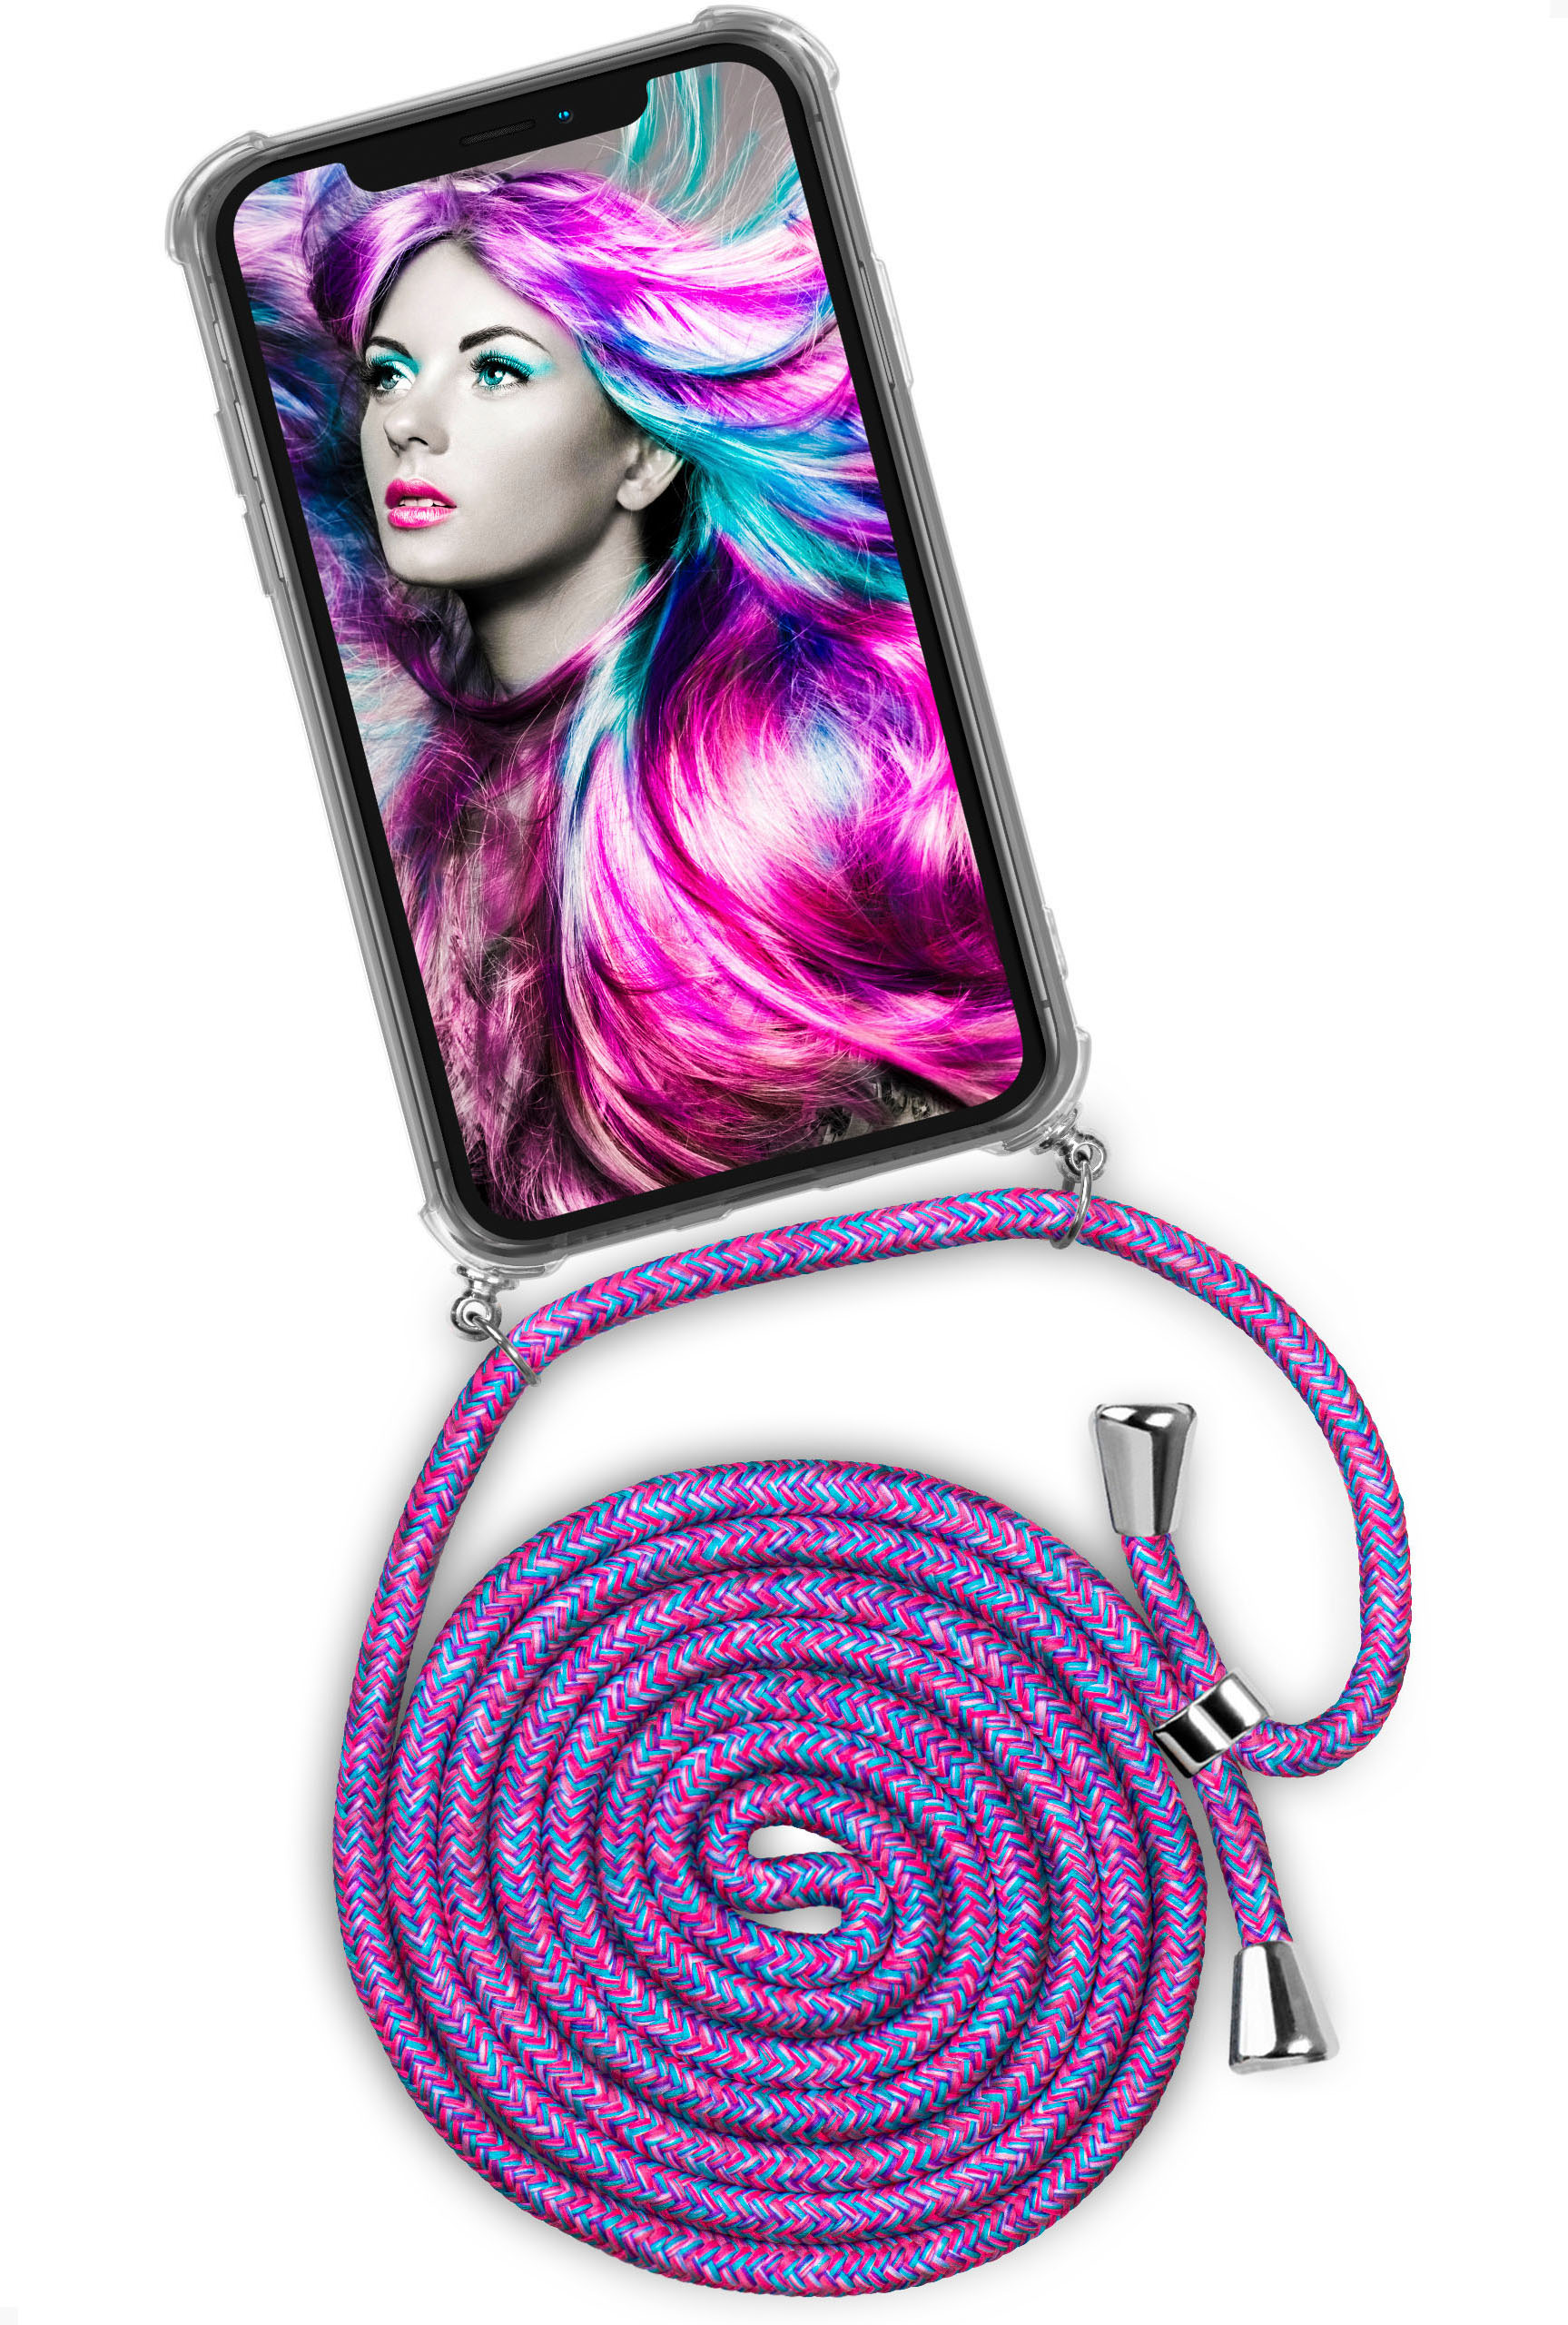 ONEFLOW Twist Case, Crazy 12 Apple, 12 (Silber) / Pro, iPhone Backcover, Unicorn